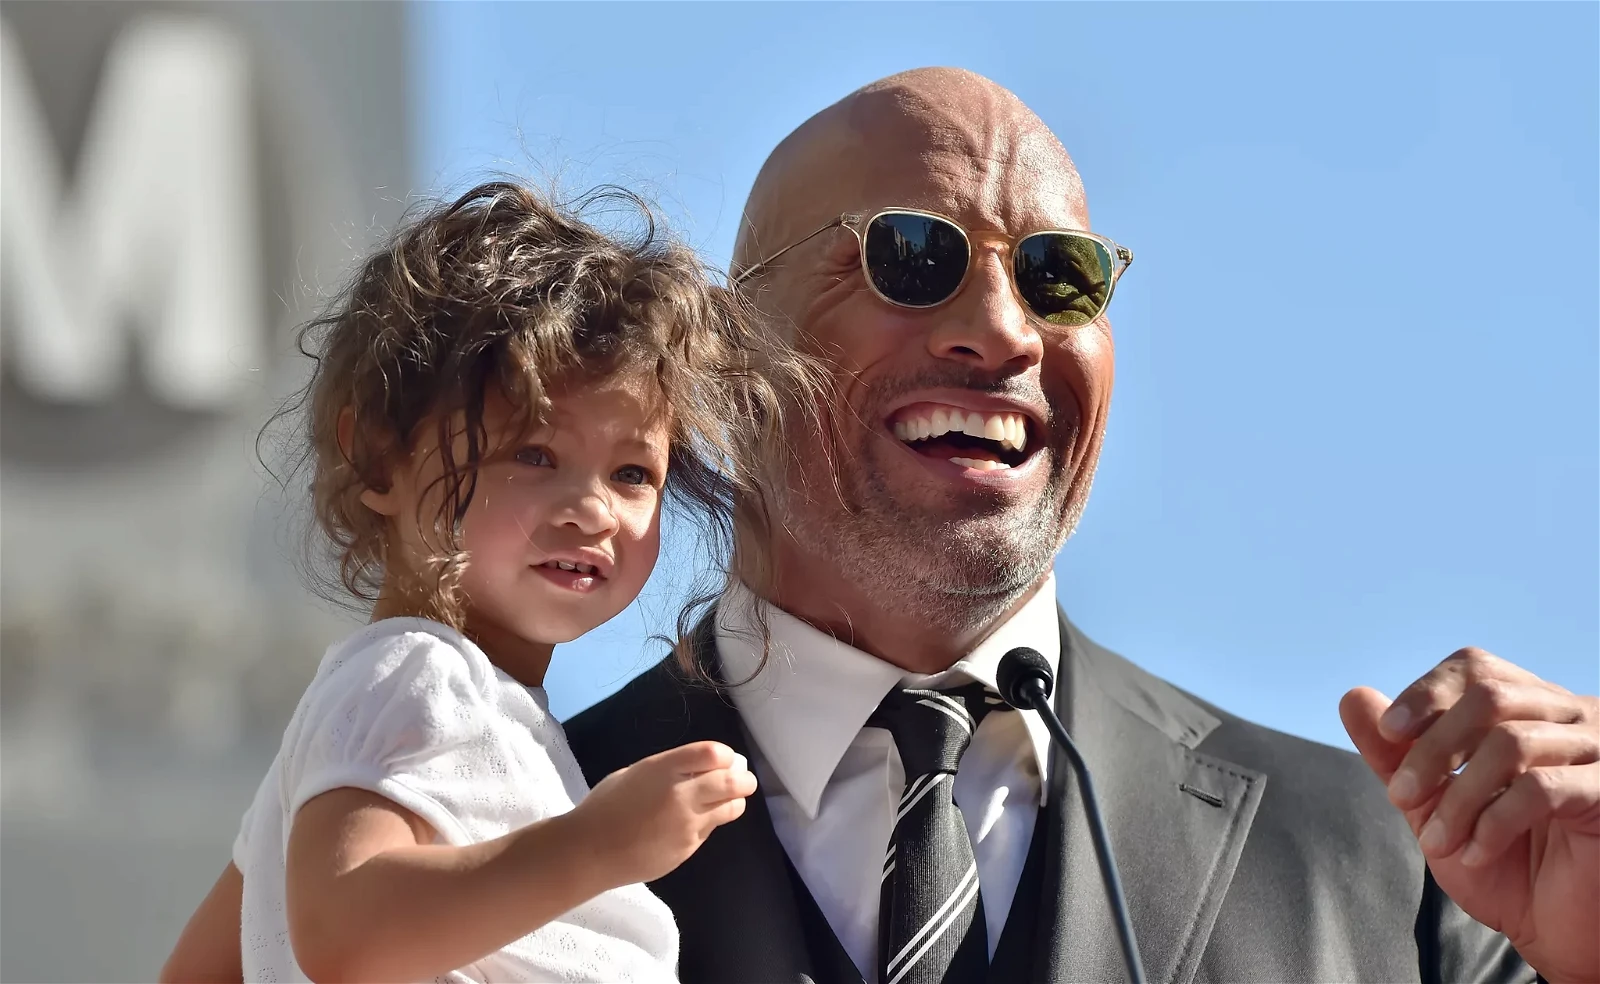 Dwayne Johnson wants to be a good father